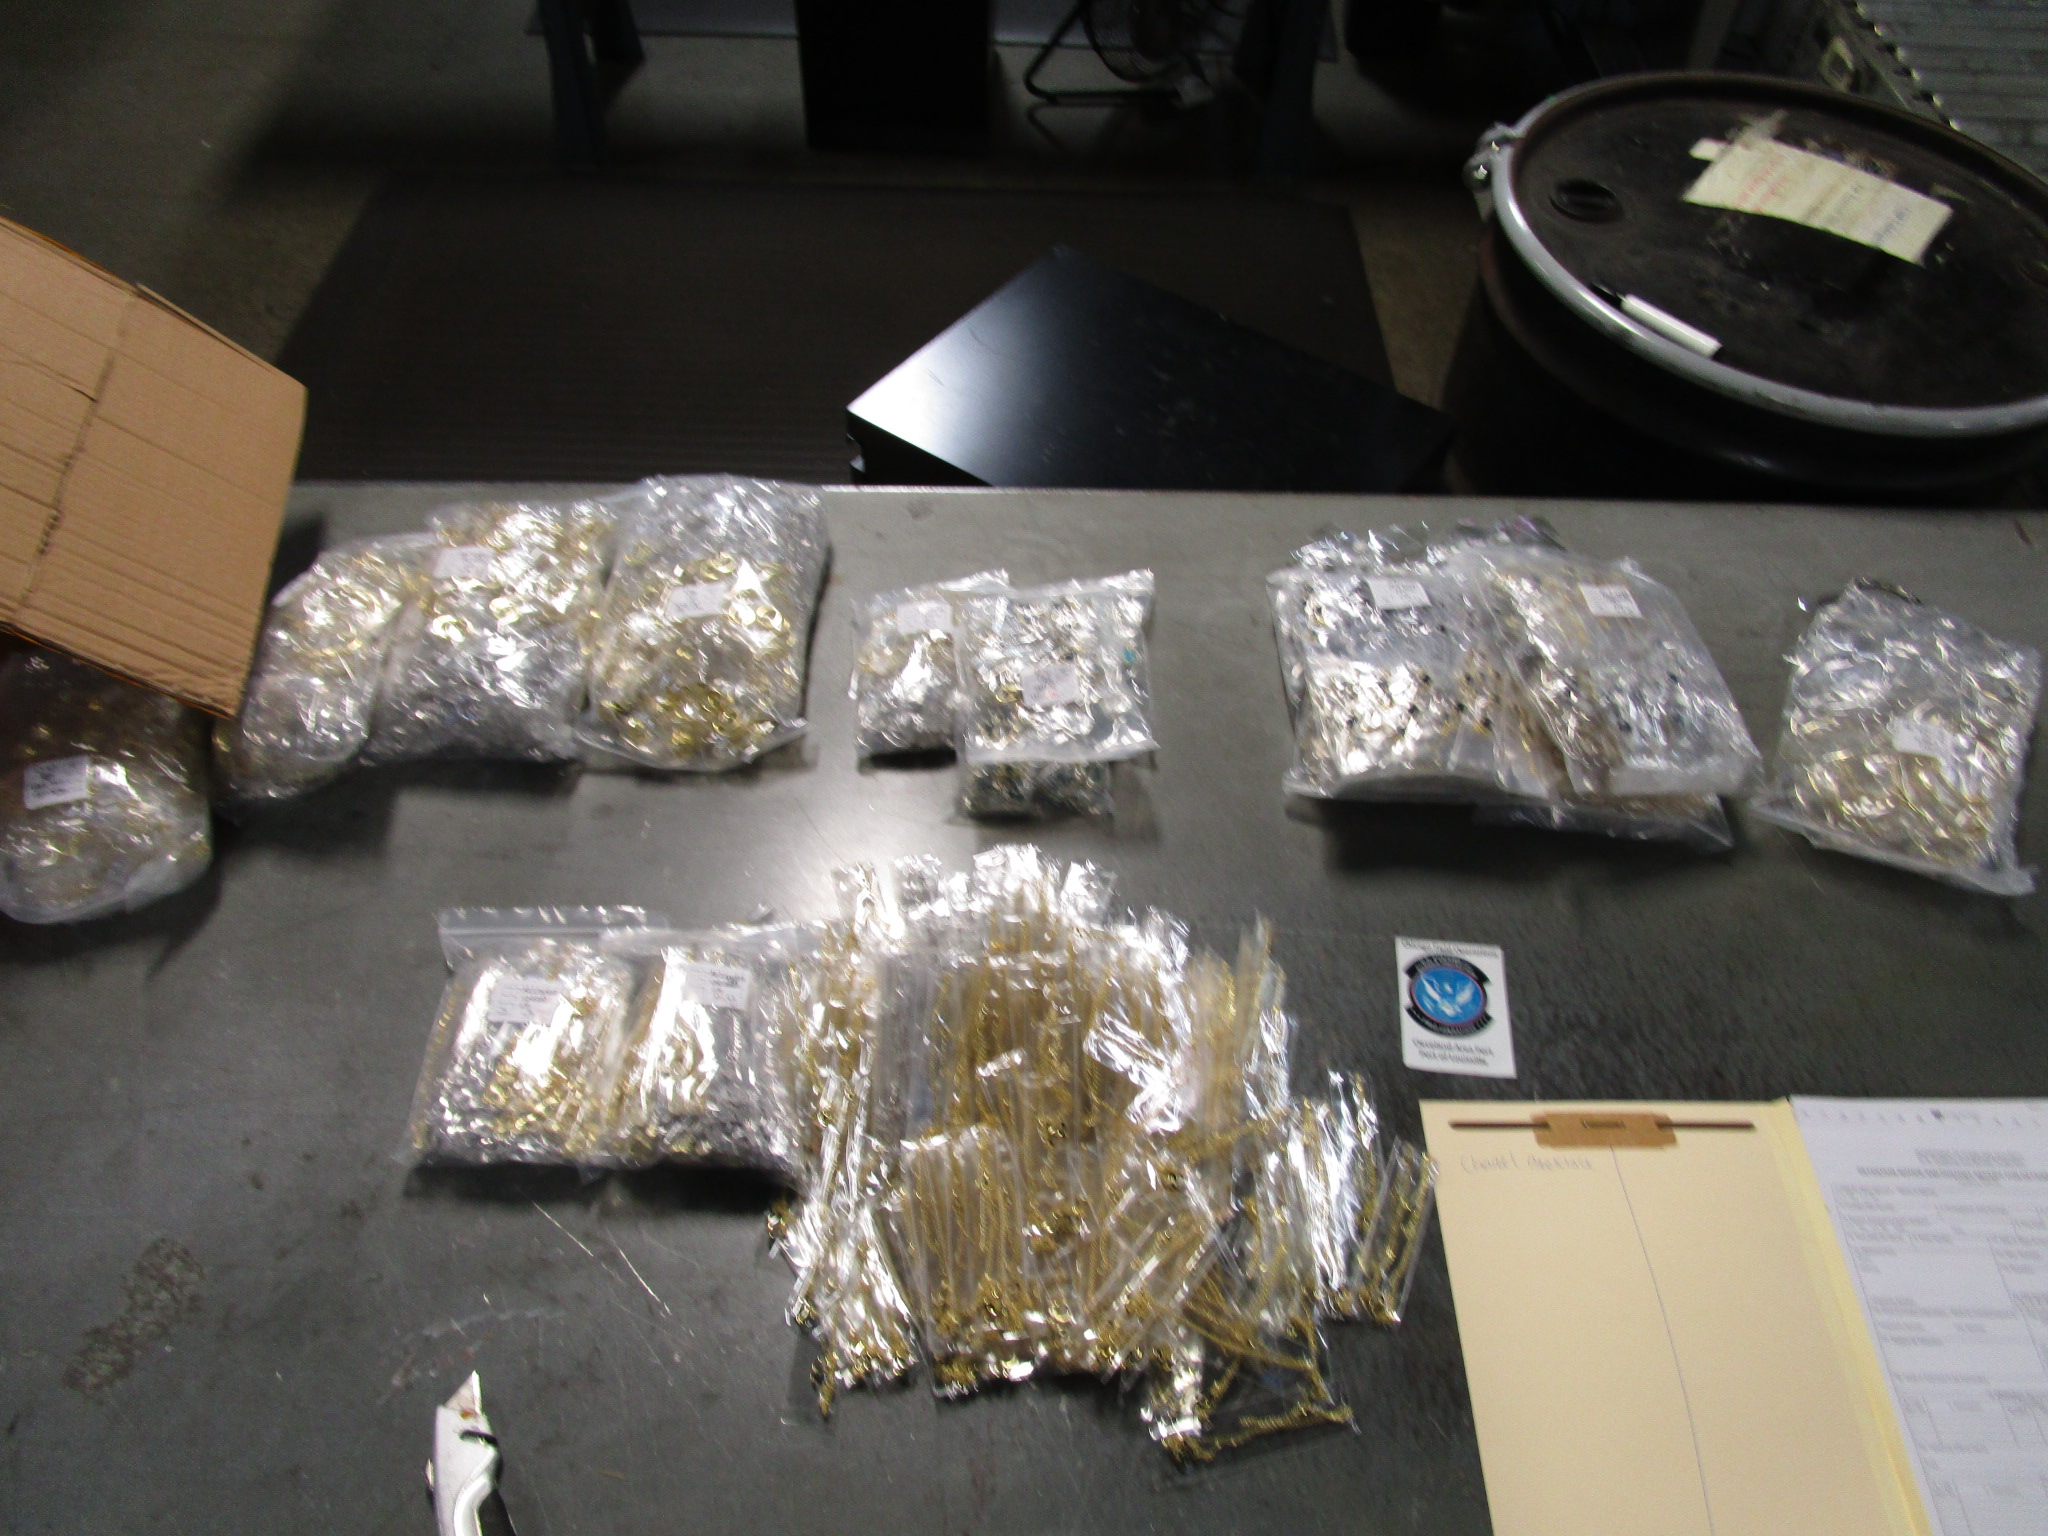 Fabulous fakes, CBP officers in Louisville seize $3.5 million in fake  earrings, Crime Reports